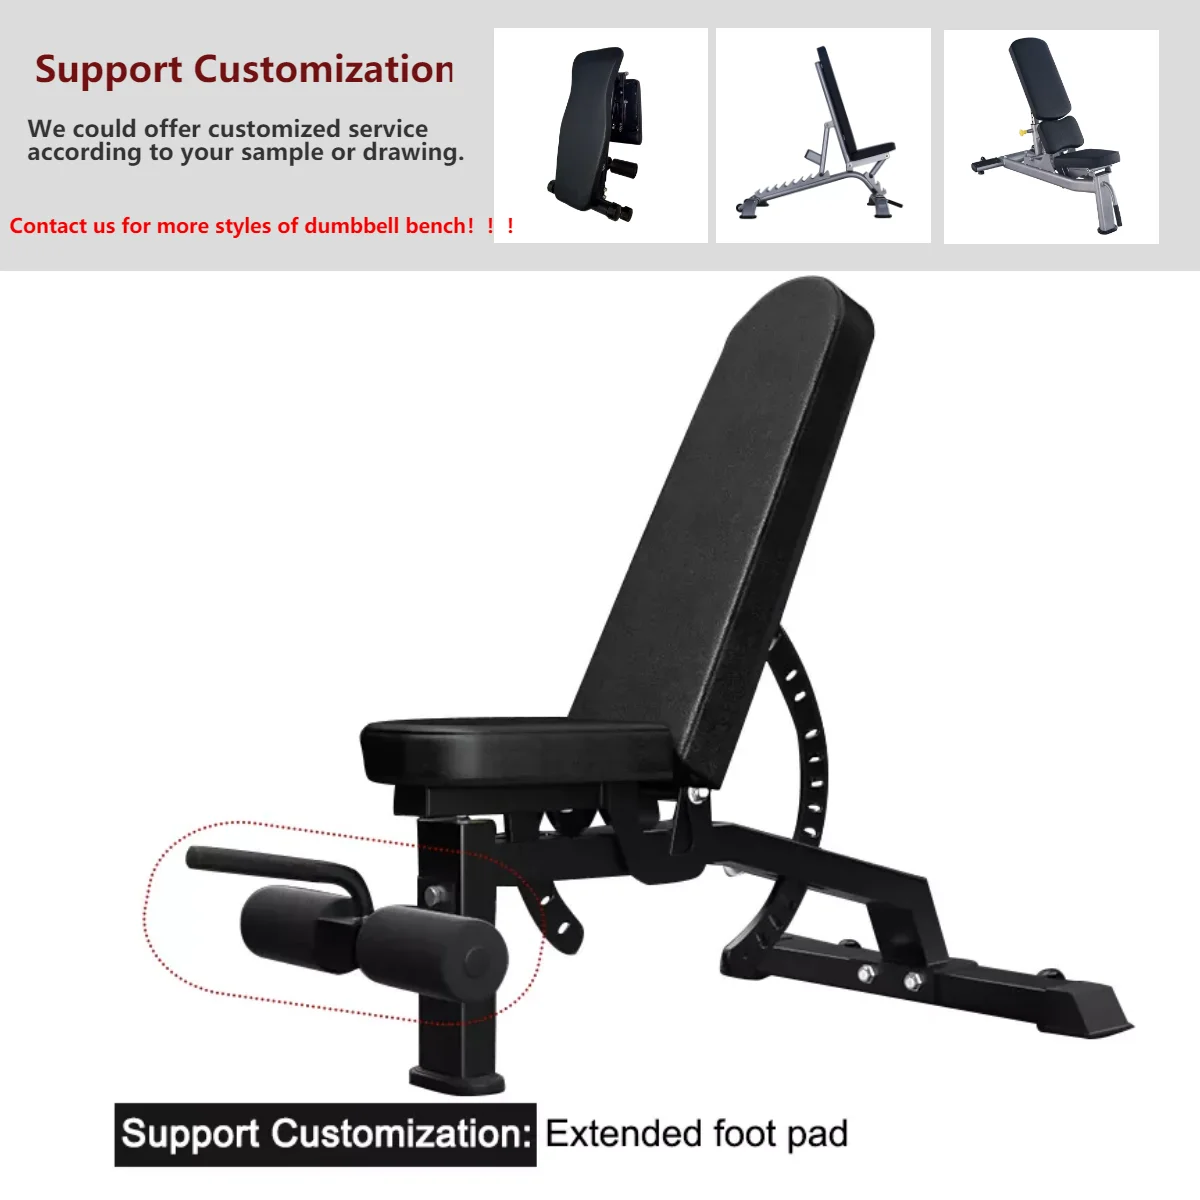 Details about   Foldable Dumbbell Bench Weight bench Training Fitness Incline Adjustable Workout 